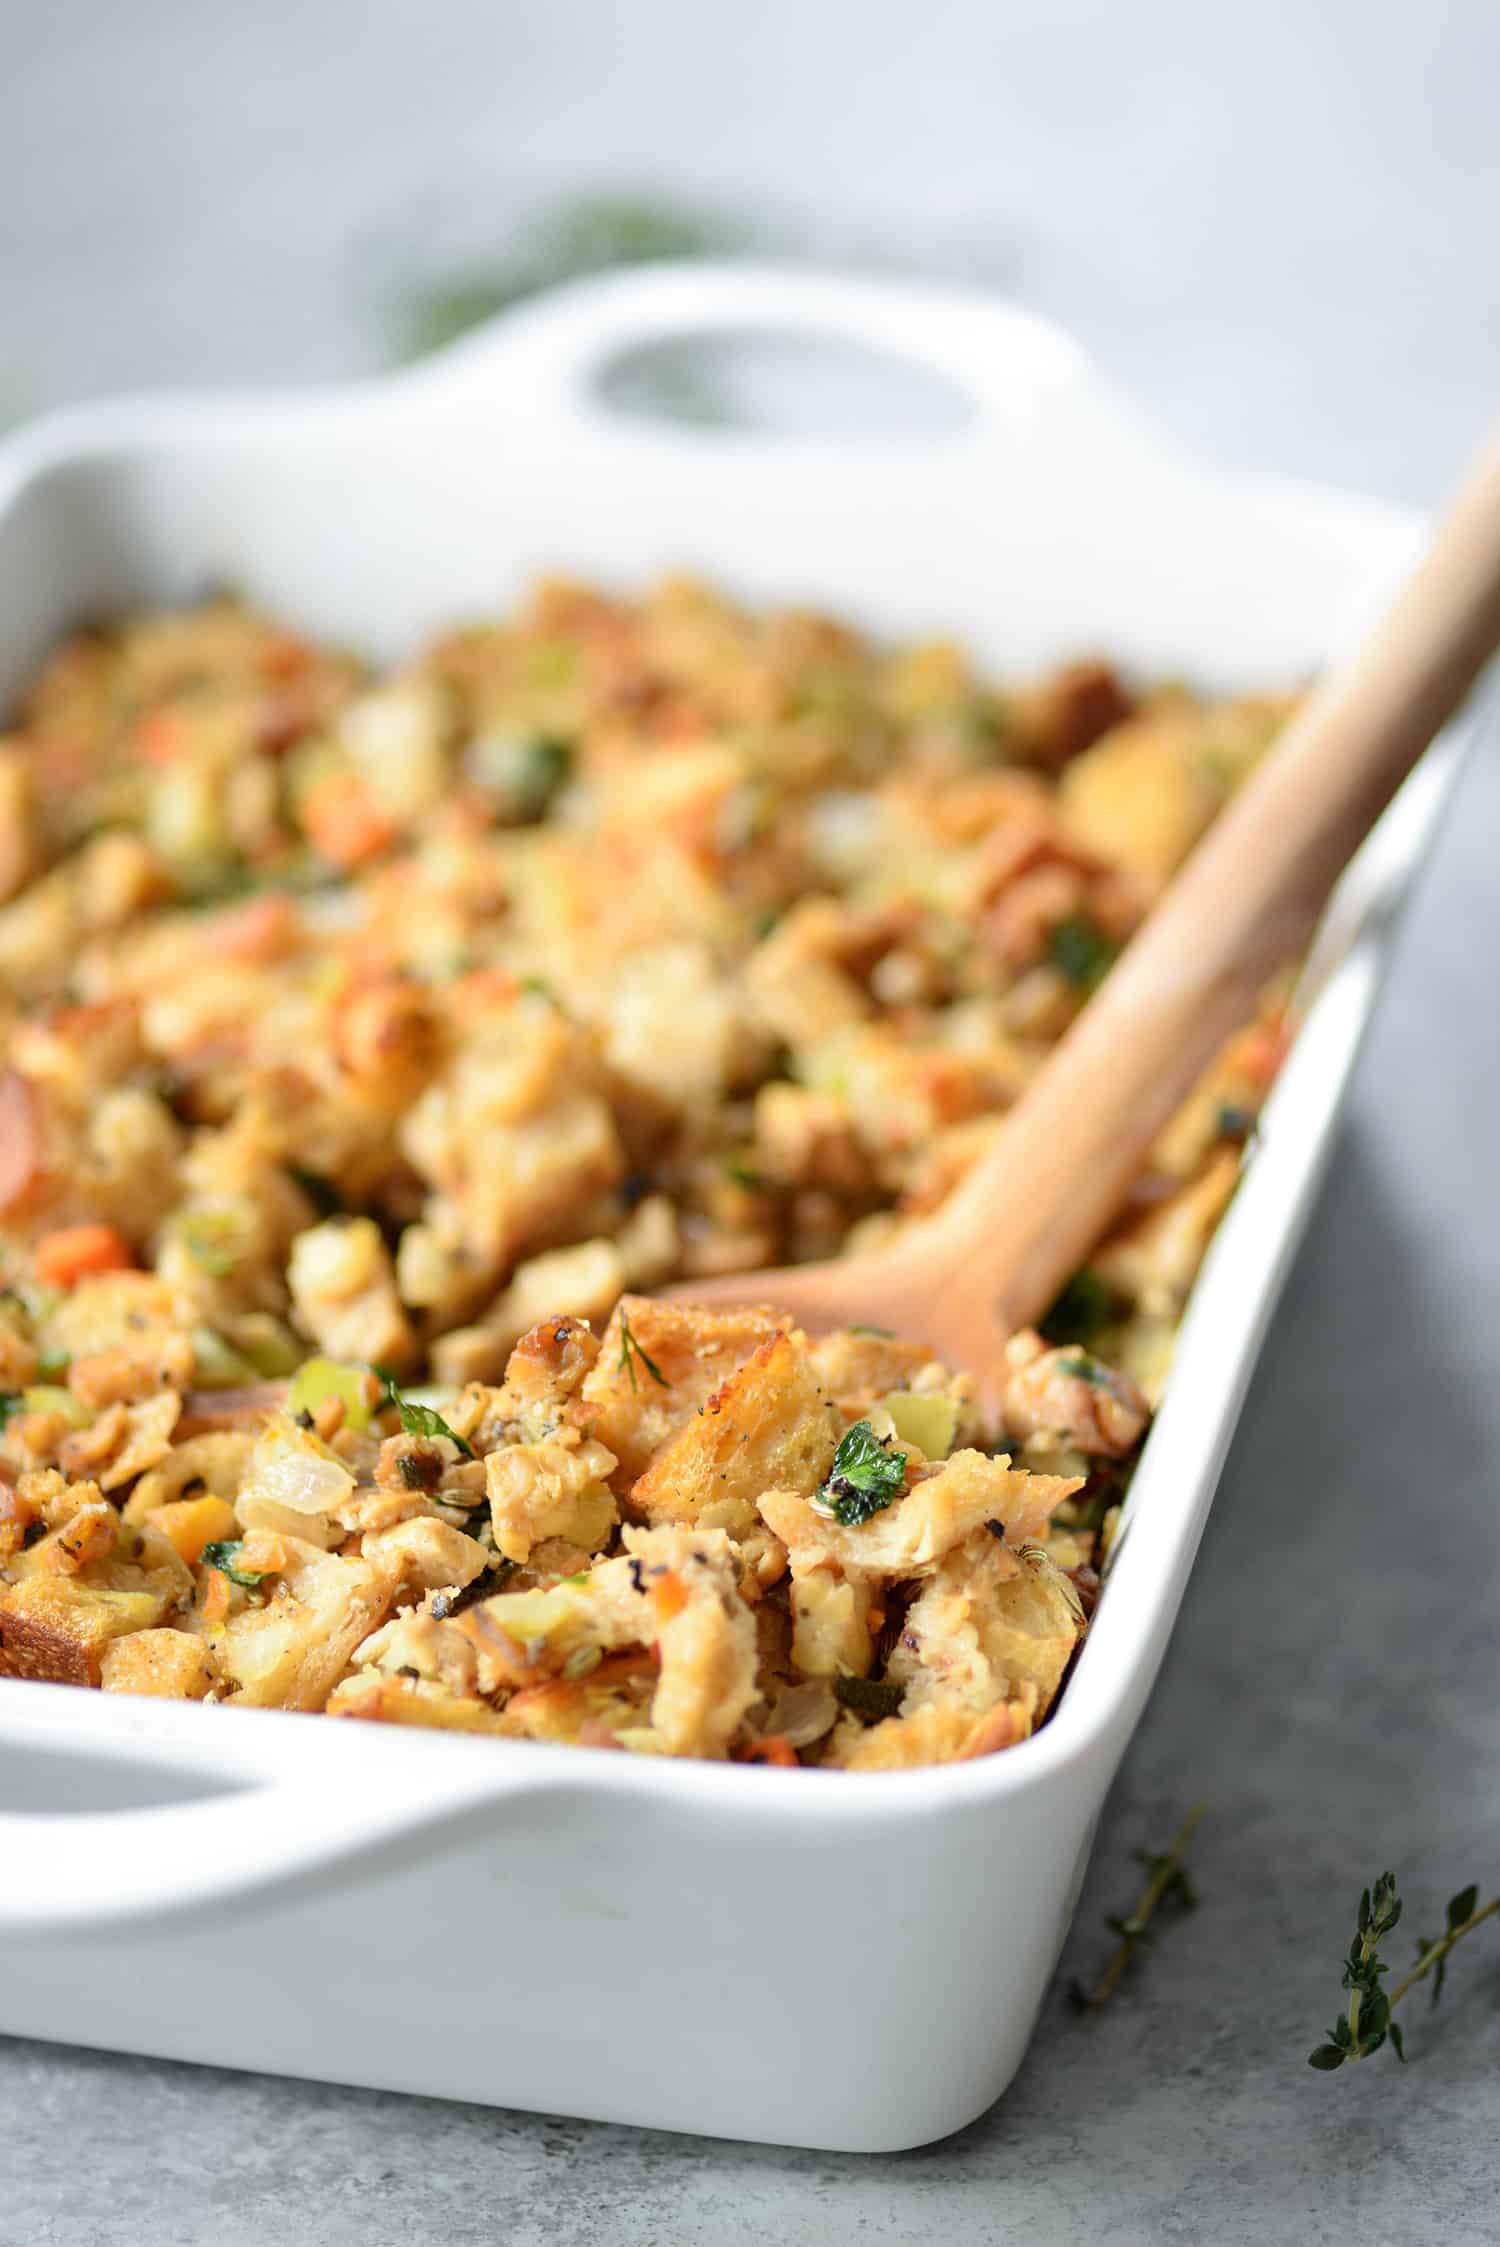 10 Plant-Based Thanksgiving Side Dishes That Are Way Better Than the Turkey